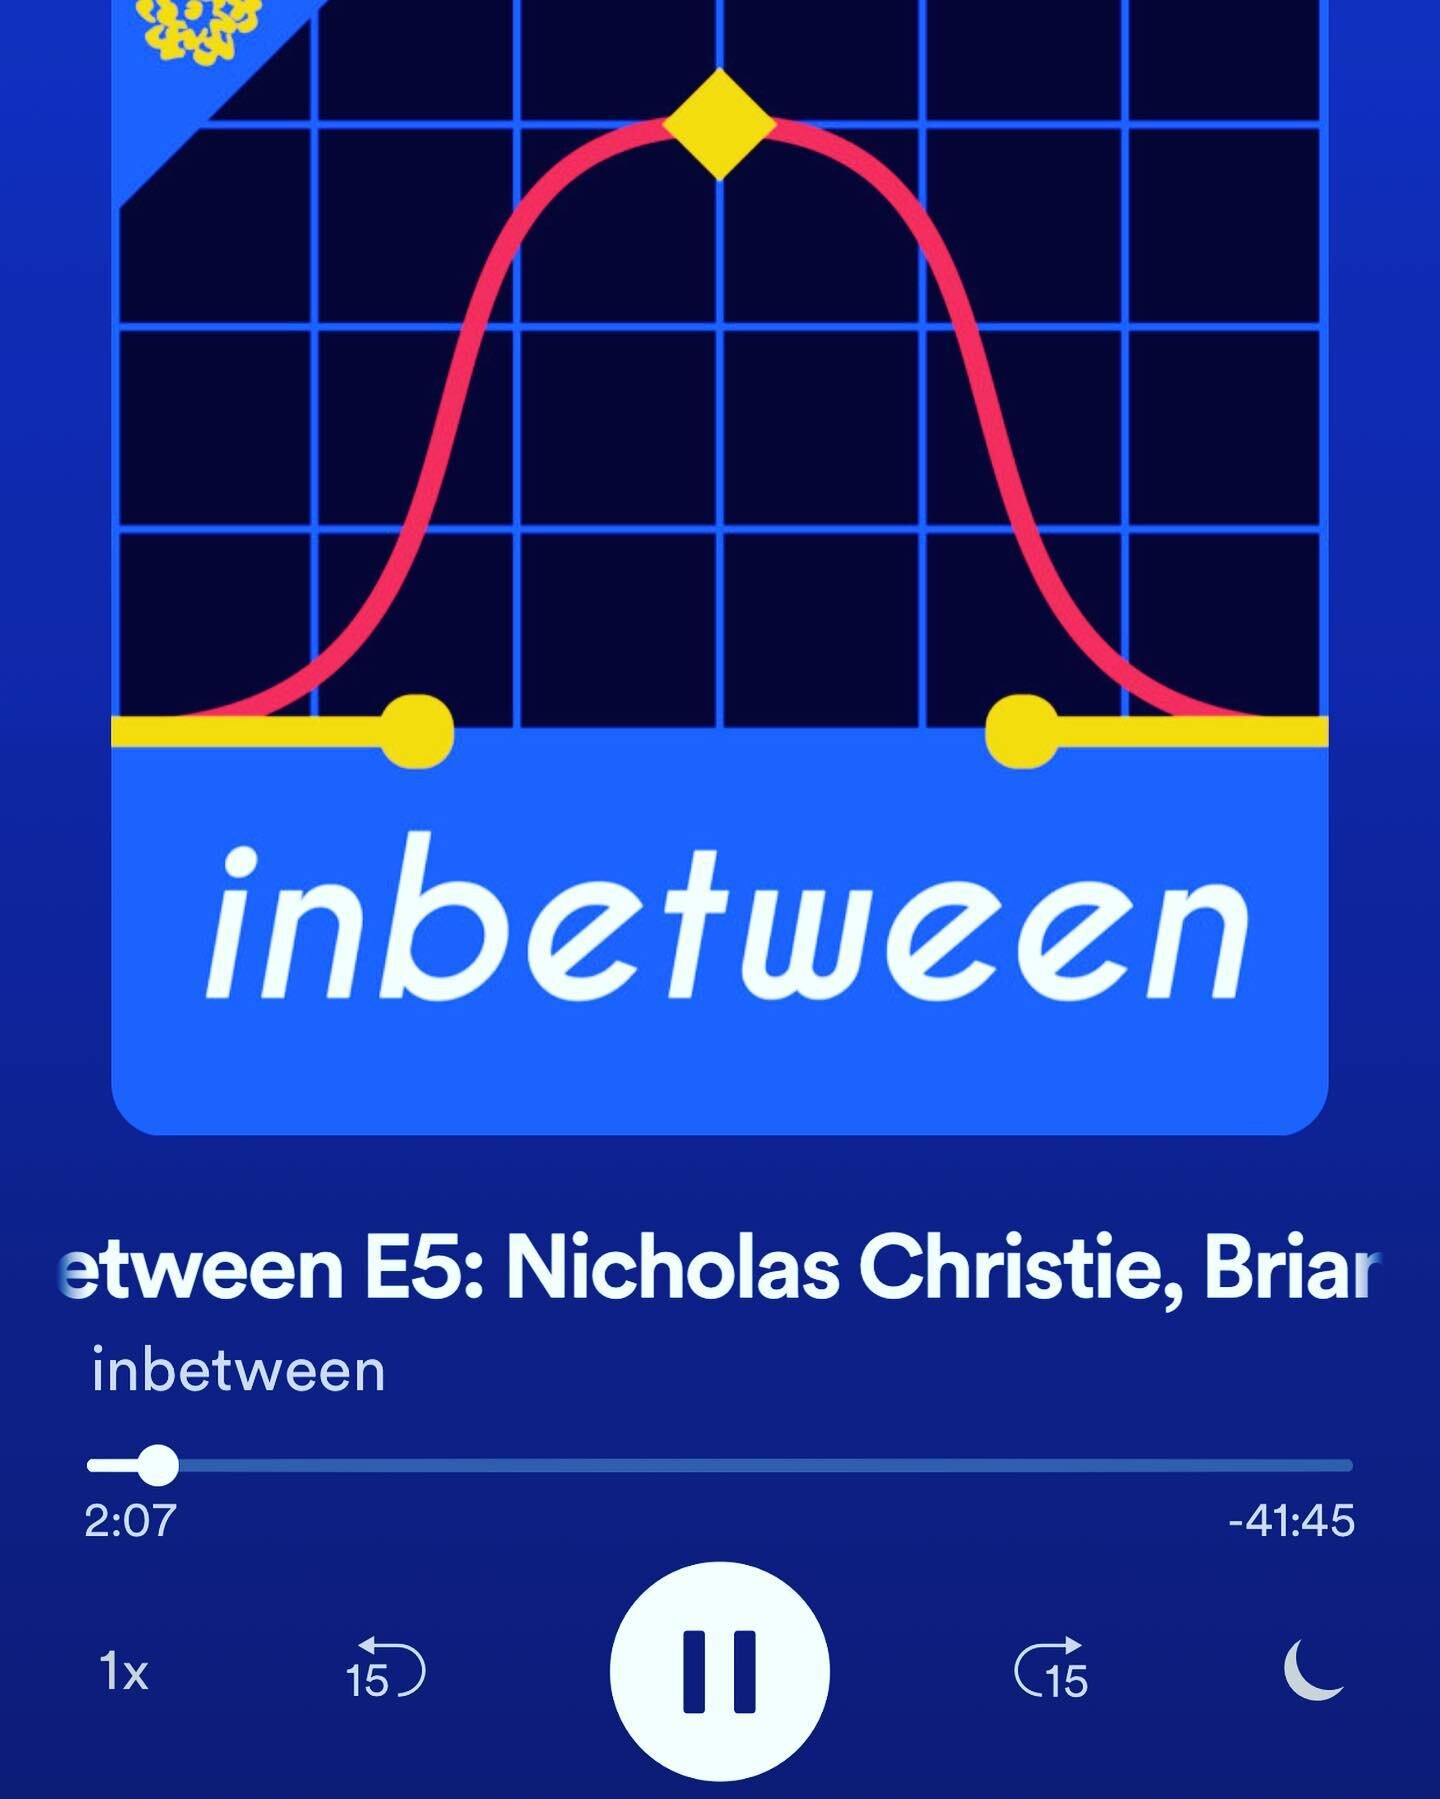 Go check us out on the inbettween podcast! Link in the bio!